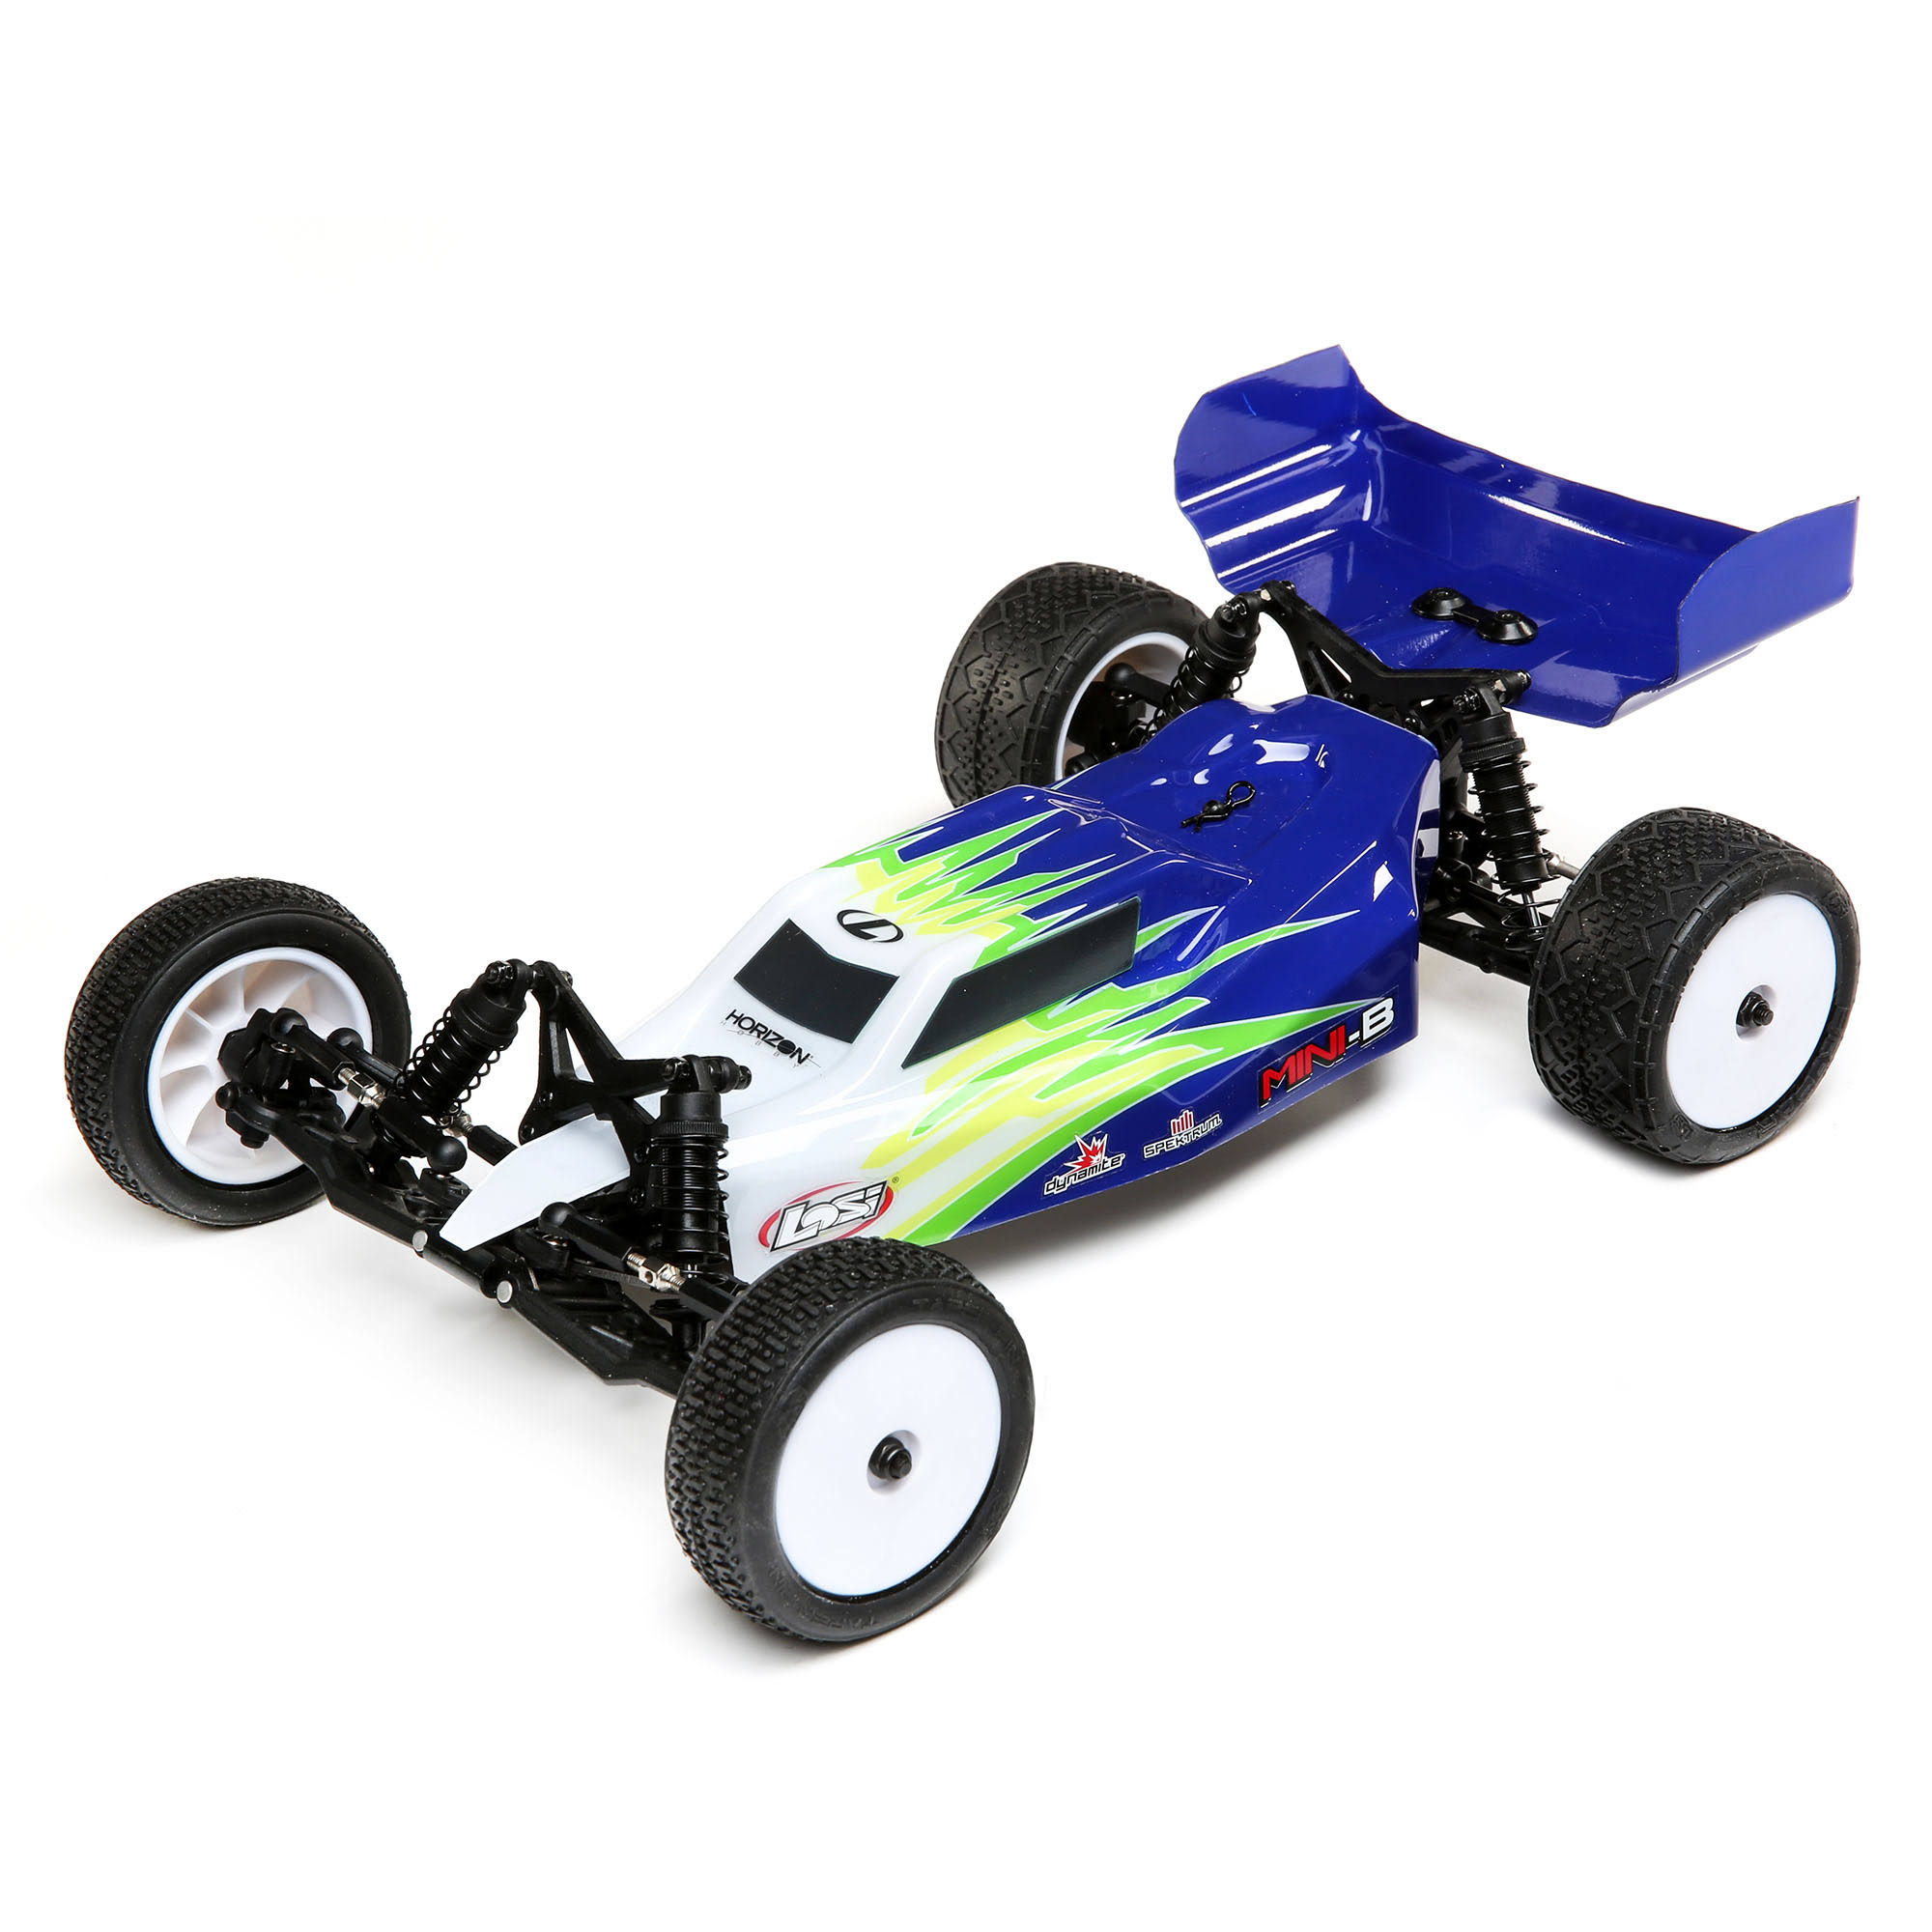 LOS01016T1 1/16 Mini-B Brushed RTR 2WD Buggy, Blue/White